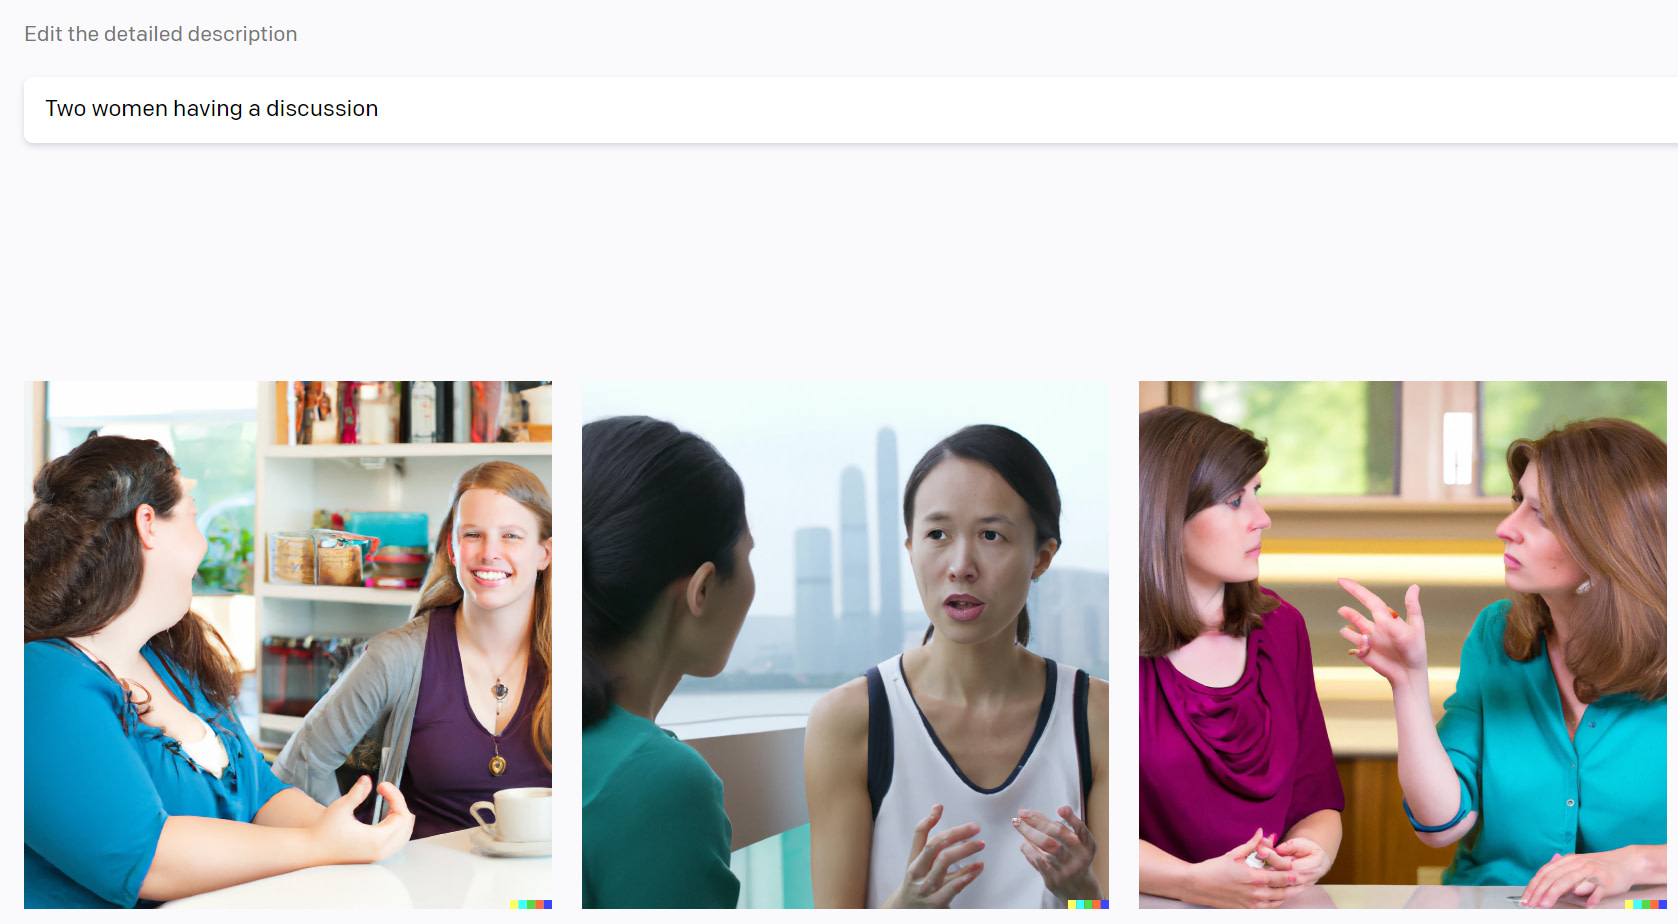 How to AI generate images for WordPress by using prompts such as "two women having a discussion", as shown here.